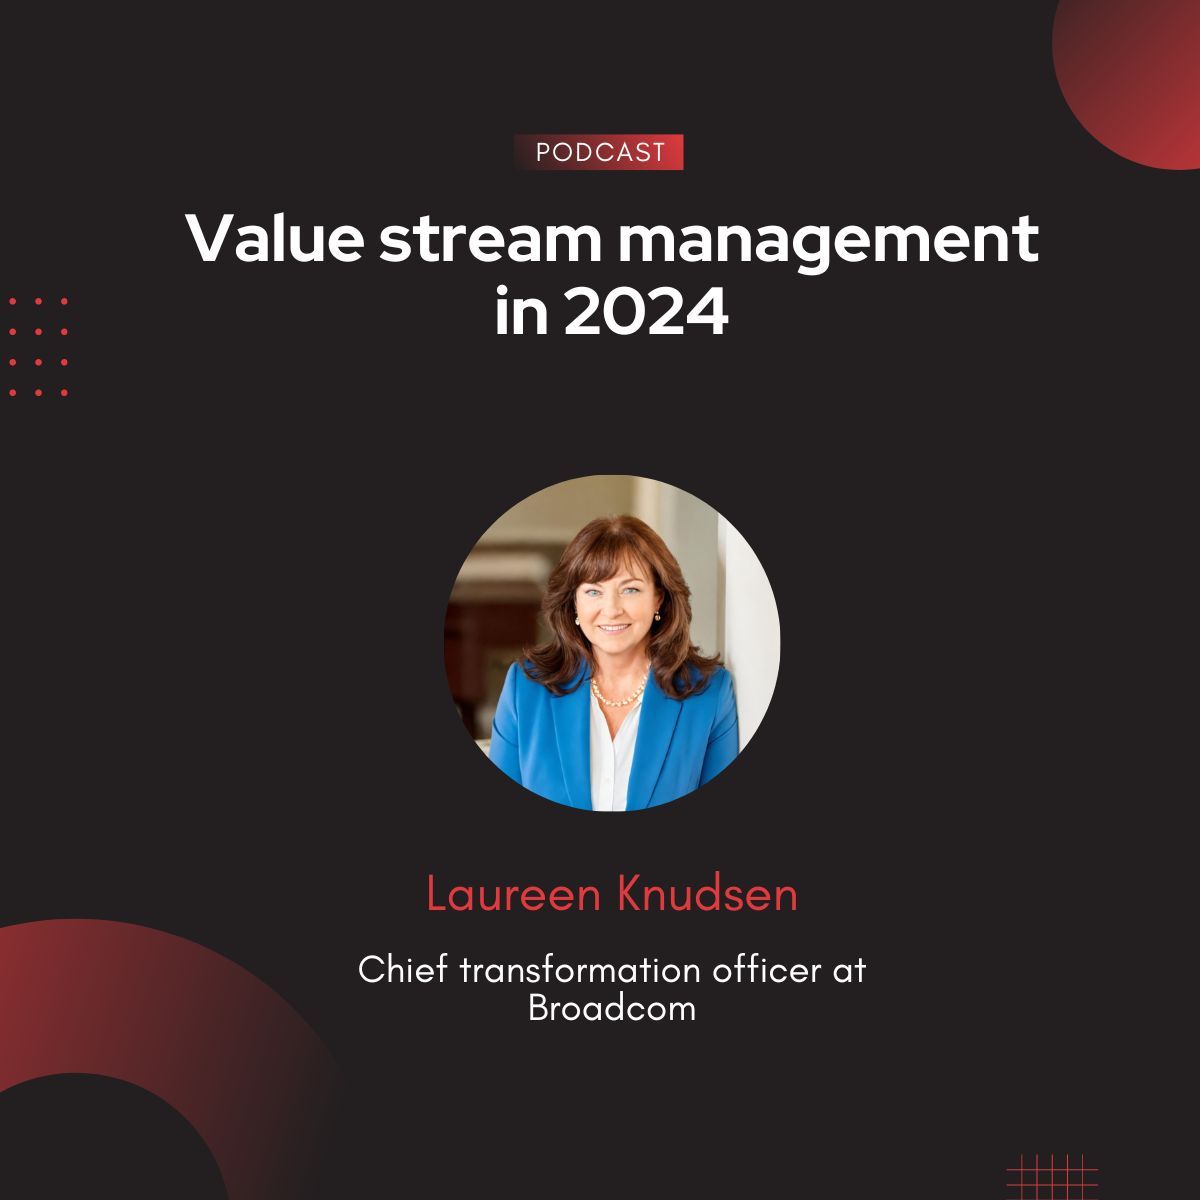 The latest episode of our podcast just dropped! Listen in as we interview @Broadcom's @LaureenKnudsen about the state of value stream in the industry and what organizations can do to improve their value streams. buff.ly/3U9SyET